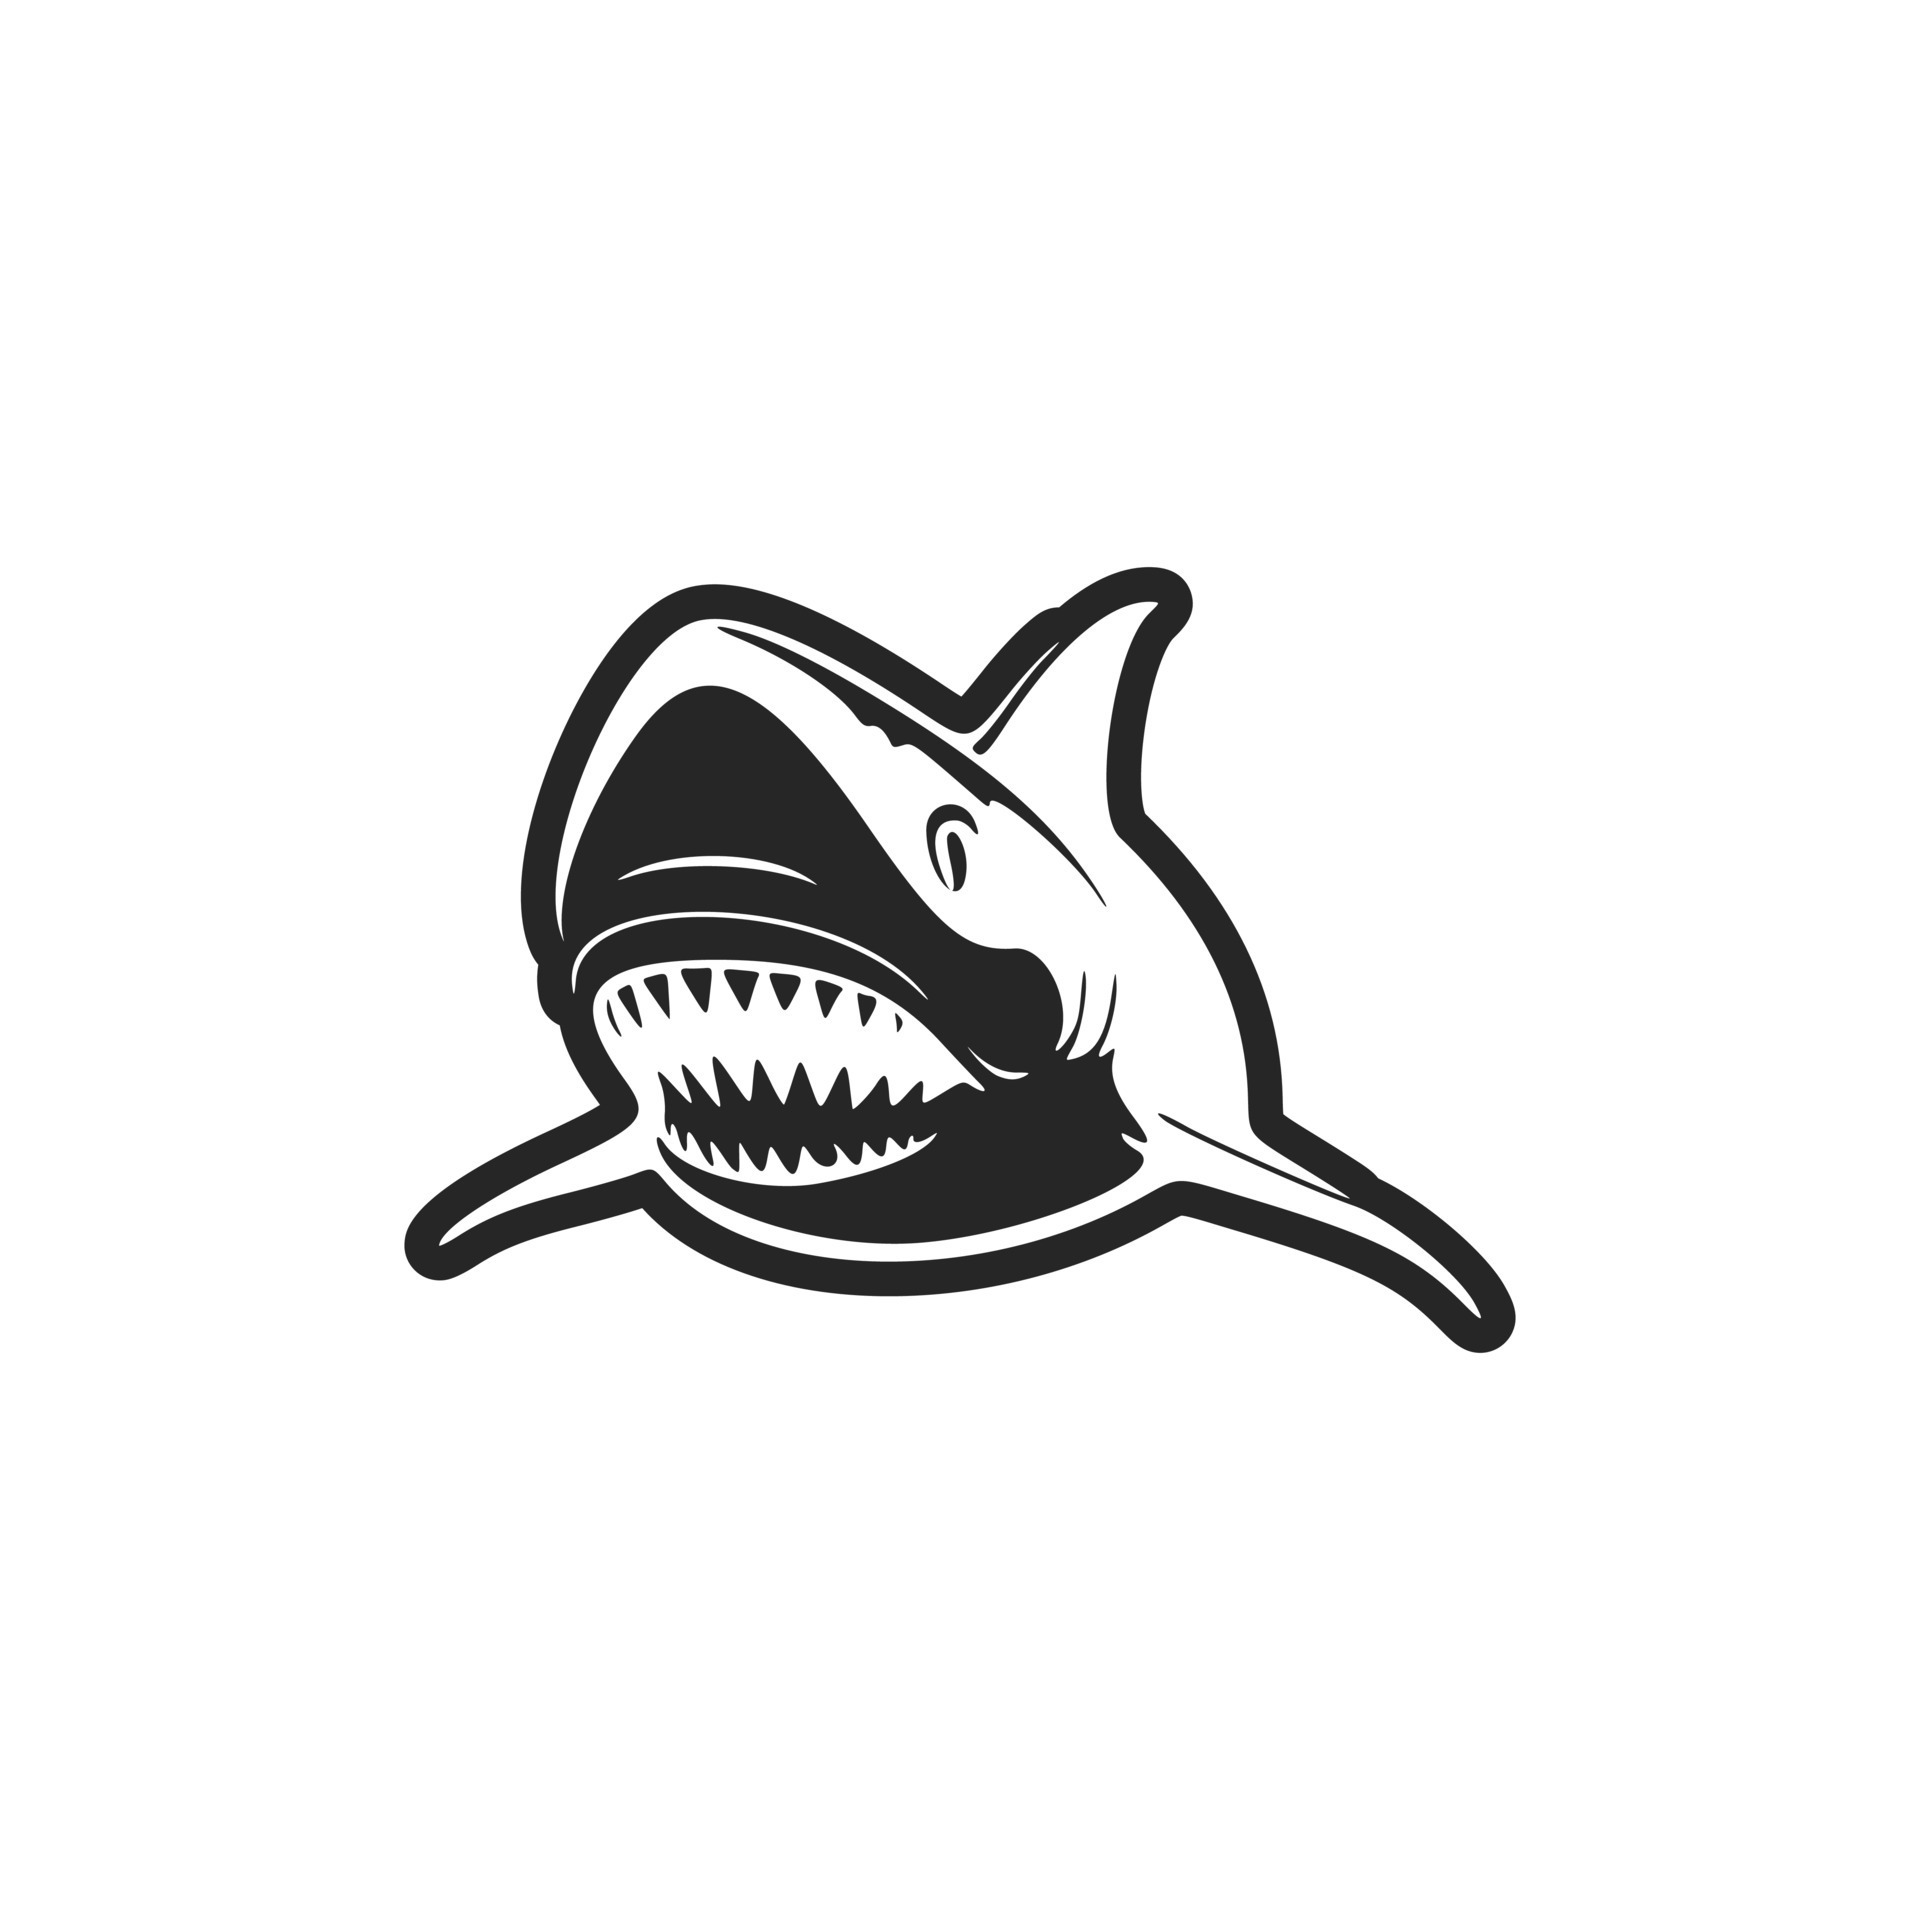 A stylish black and white shark logo vector for your brand identity ...